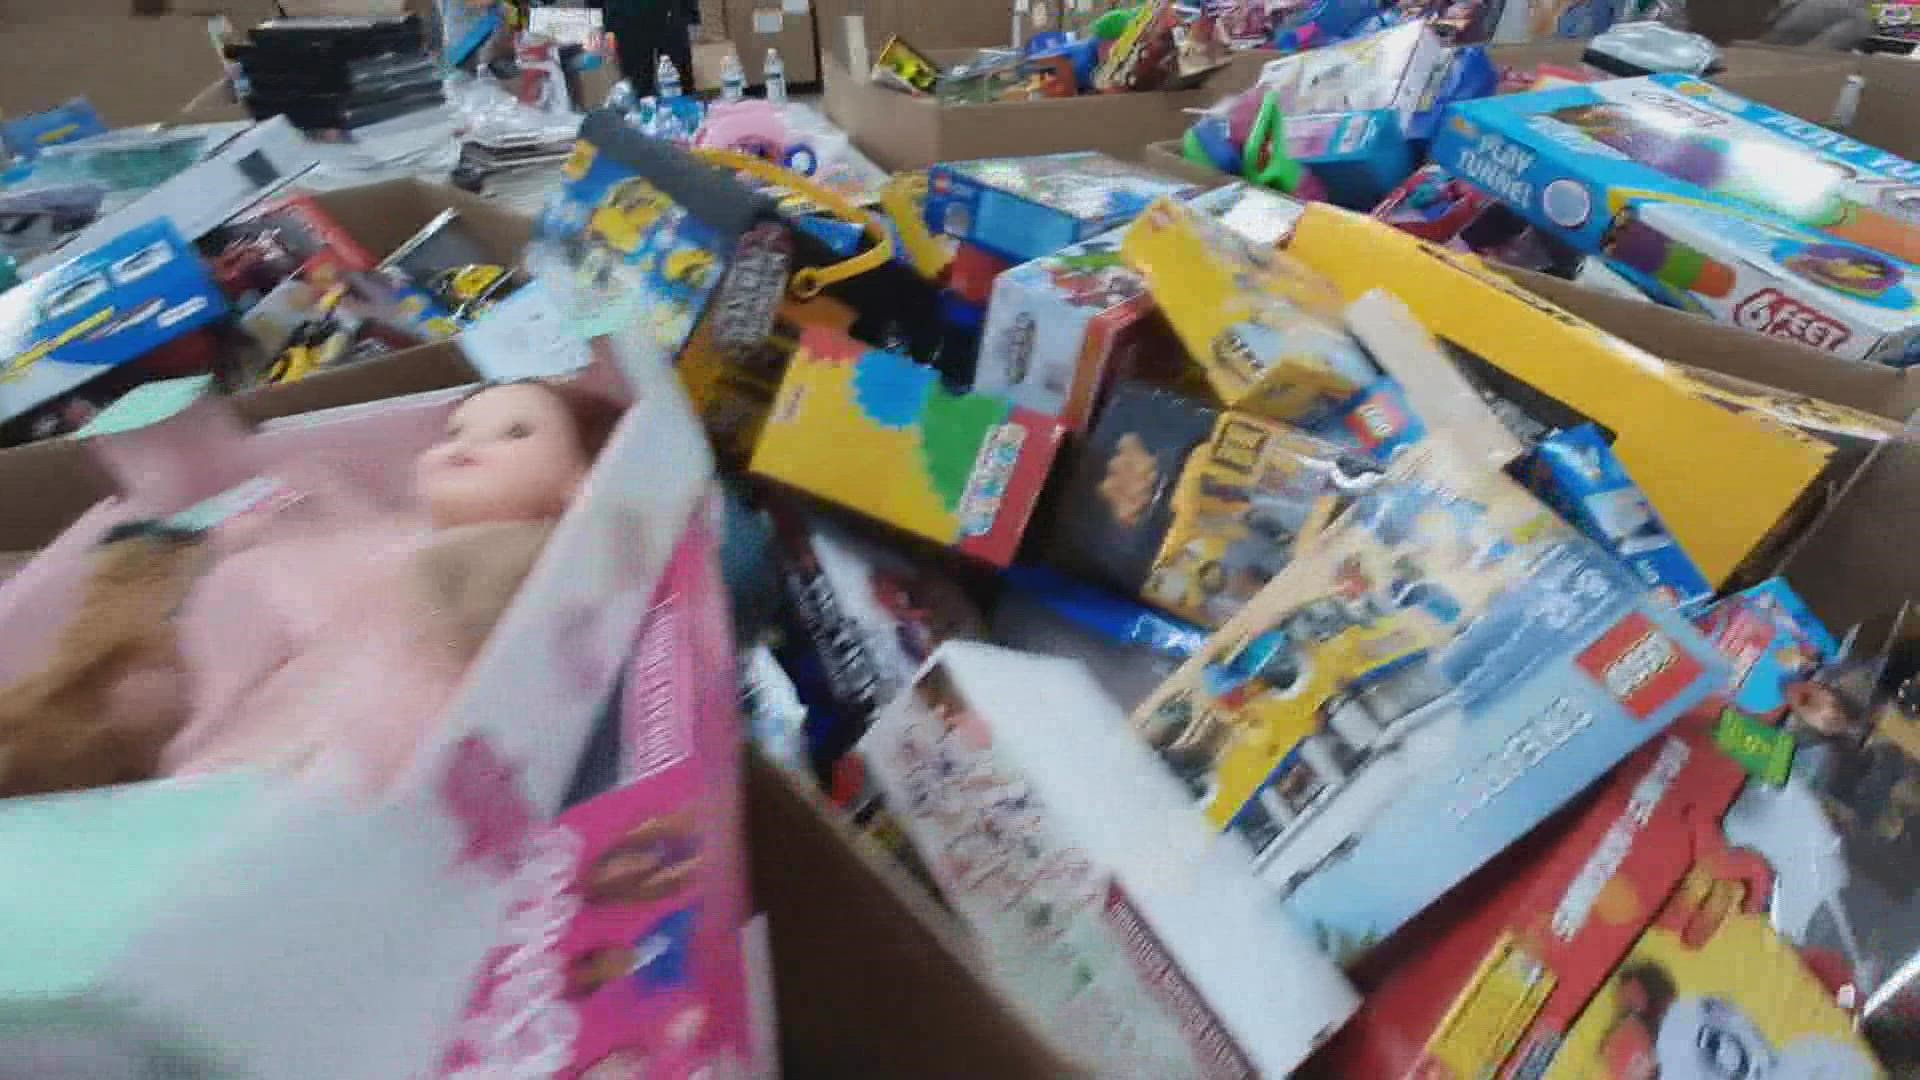 Toys for Tots officials say monetary donations are still being taken and are much needed this year.